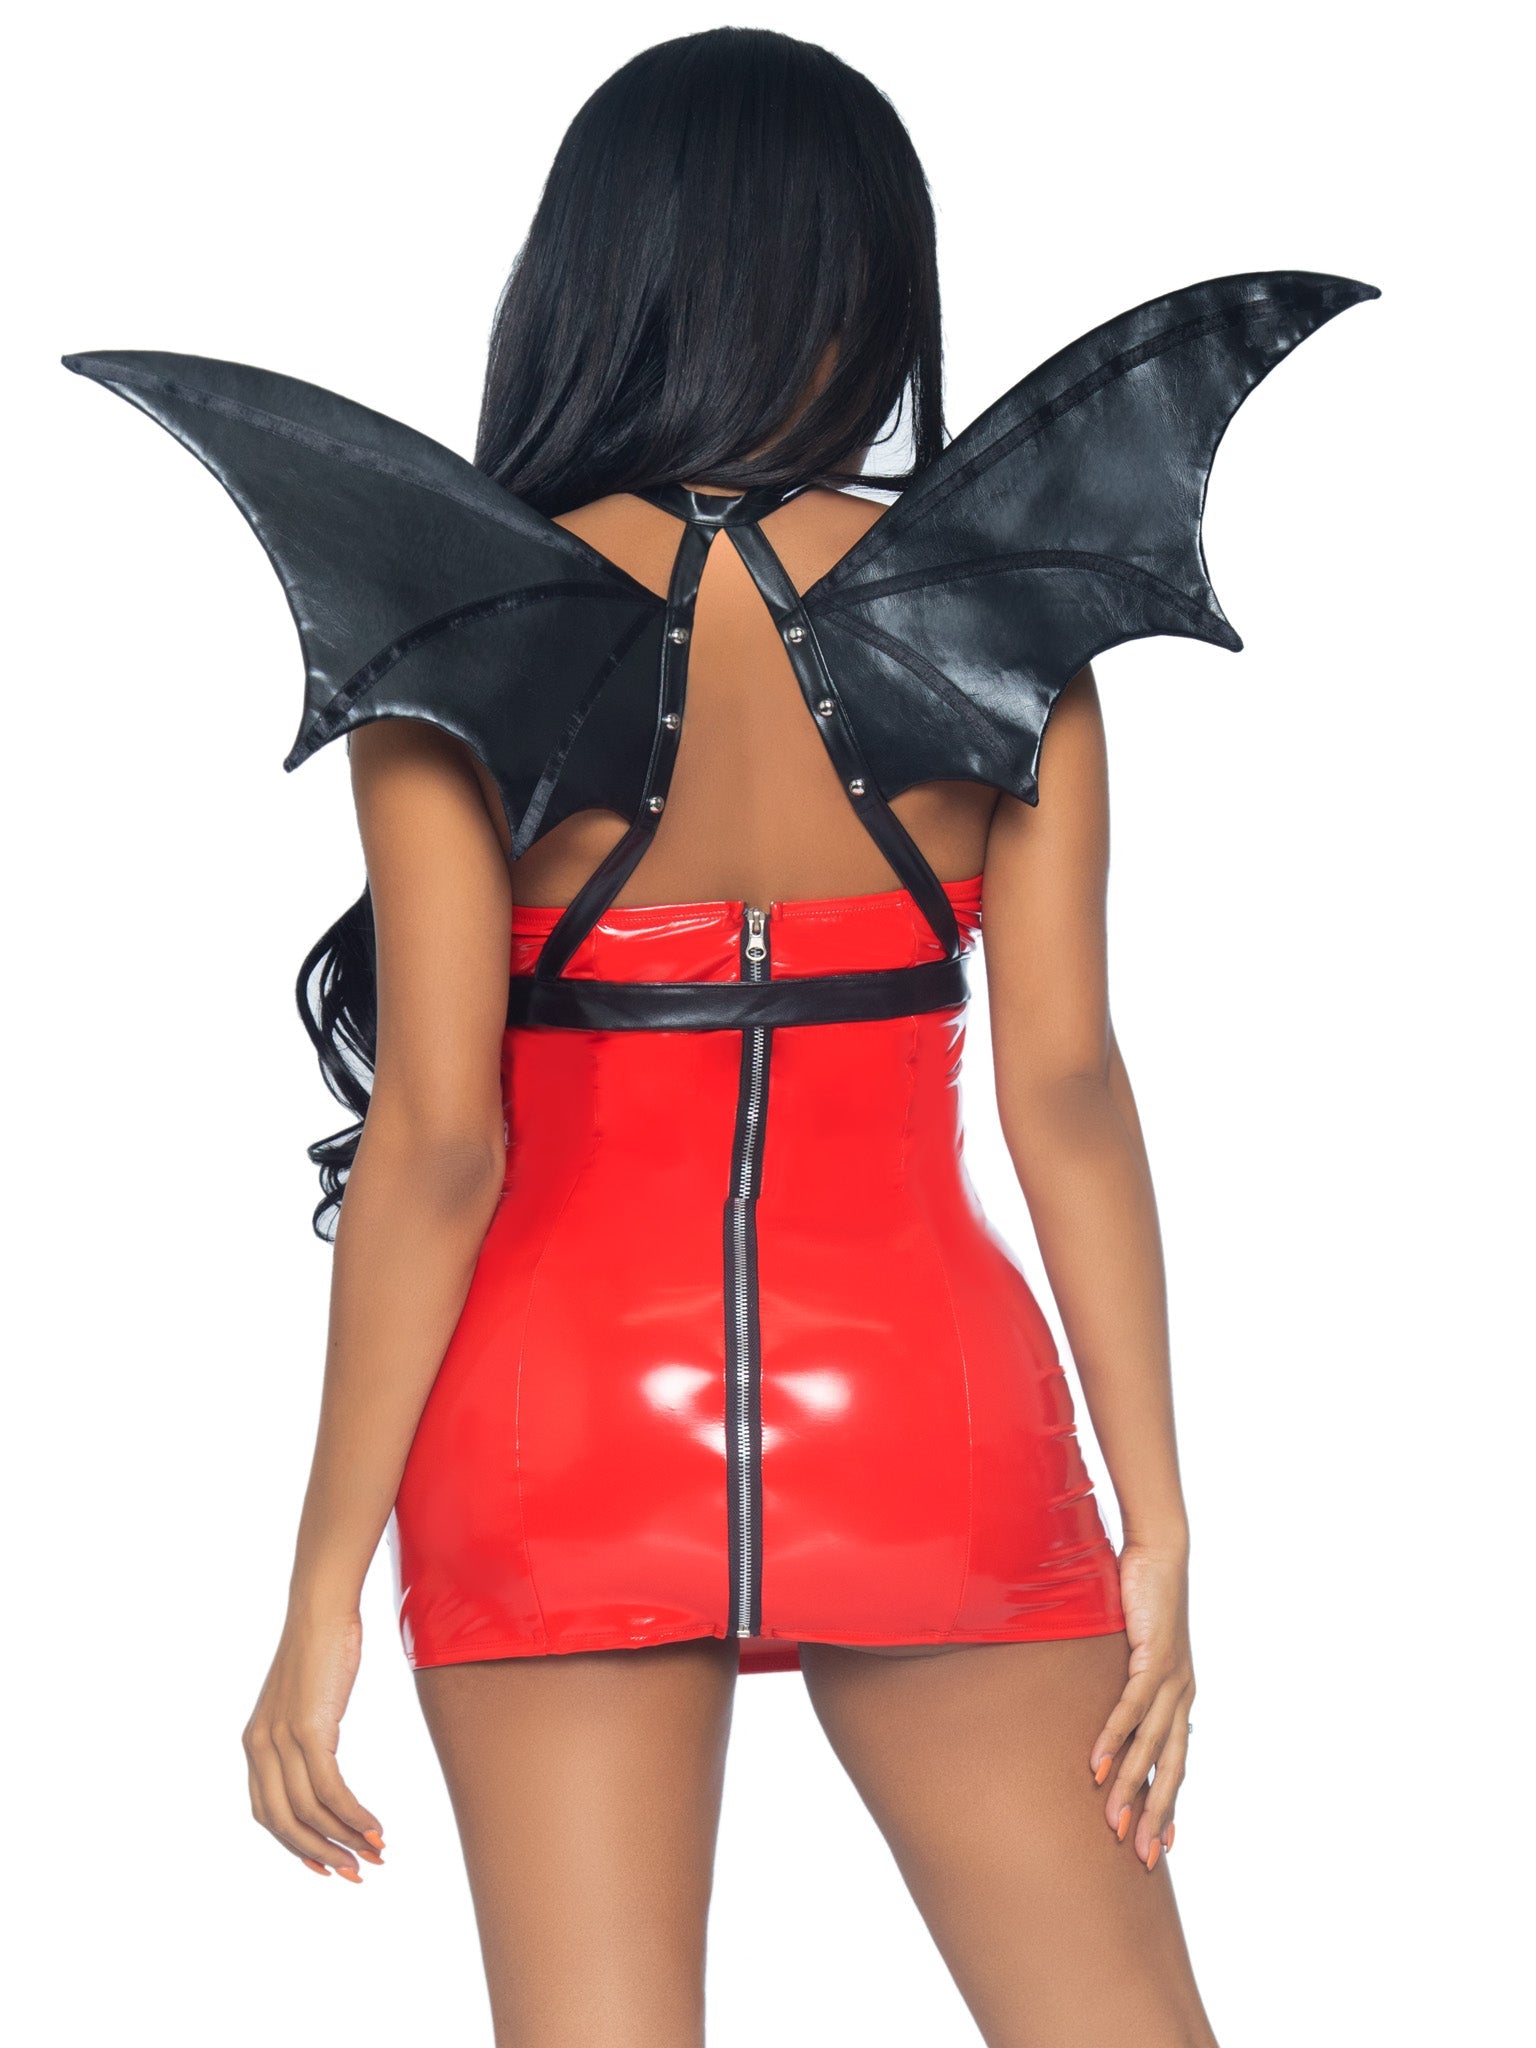 Leather Bat Wing Body Harness